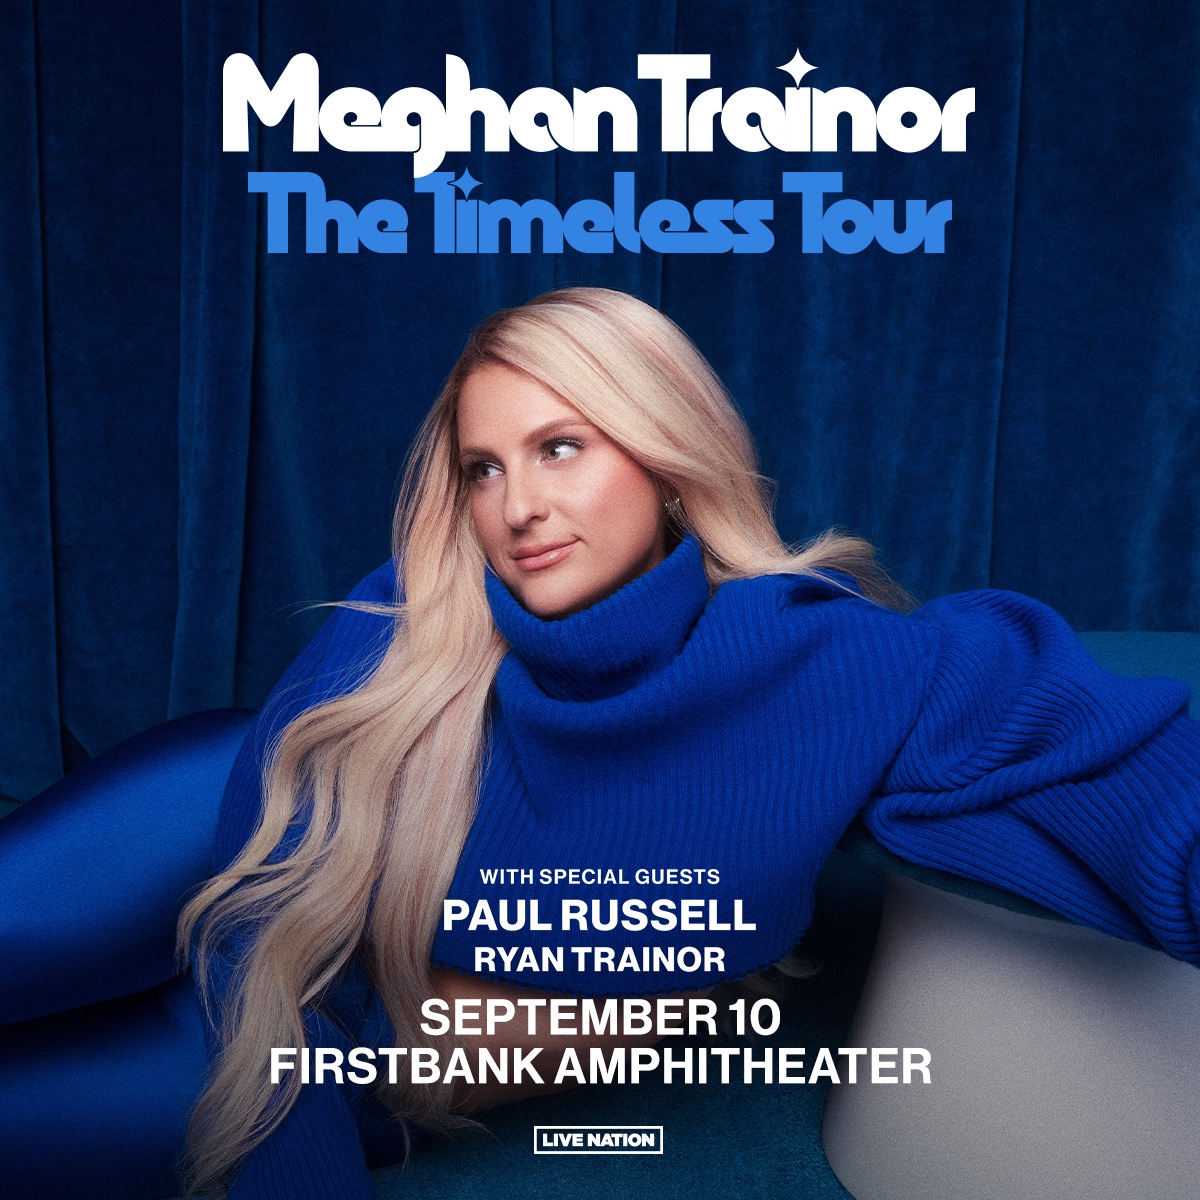 Meghan Trainor with special guests Paul Russell & Ryan Trainor in Franklin, Tenn.